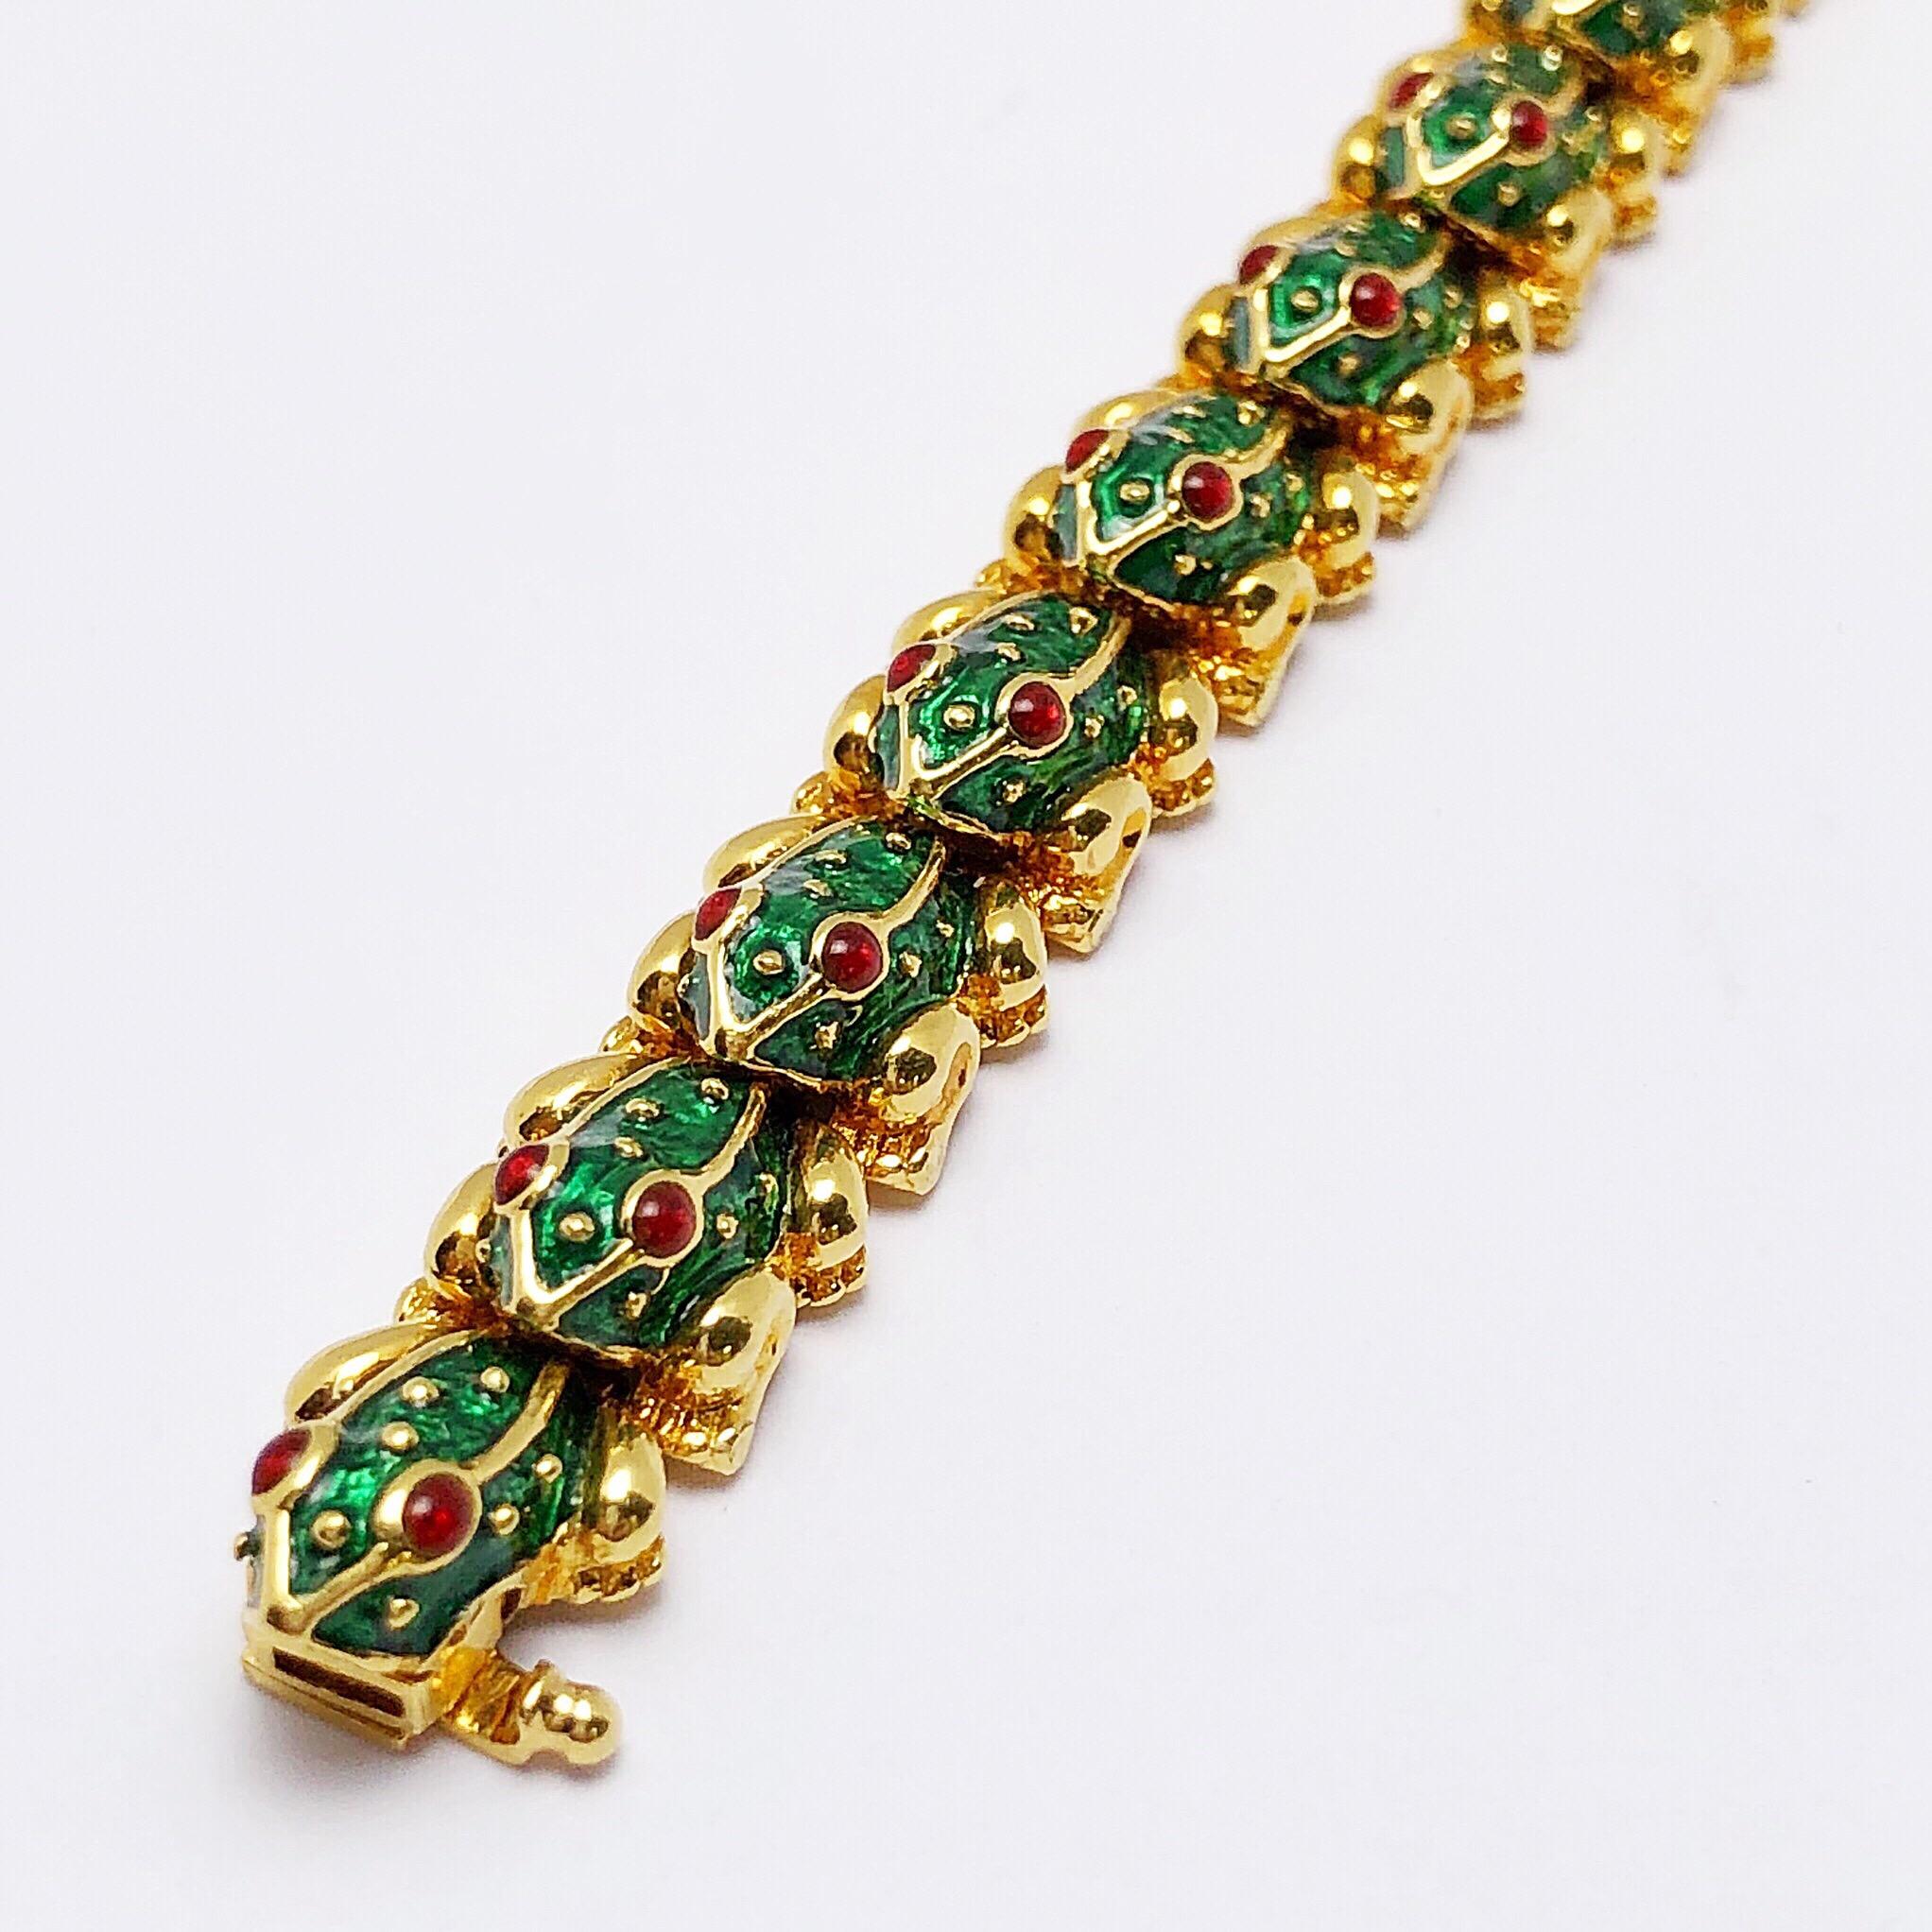 Crafted in true Hidalgo style this bracelet is designed with 17 interconnected frogs, making this line bracelet flexible. Each frog has been meticulously enameled in a vibrant green and set with cabachon ruby eyes. The bracelet measures 7.5